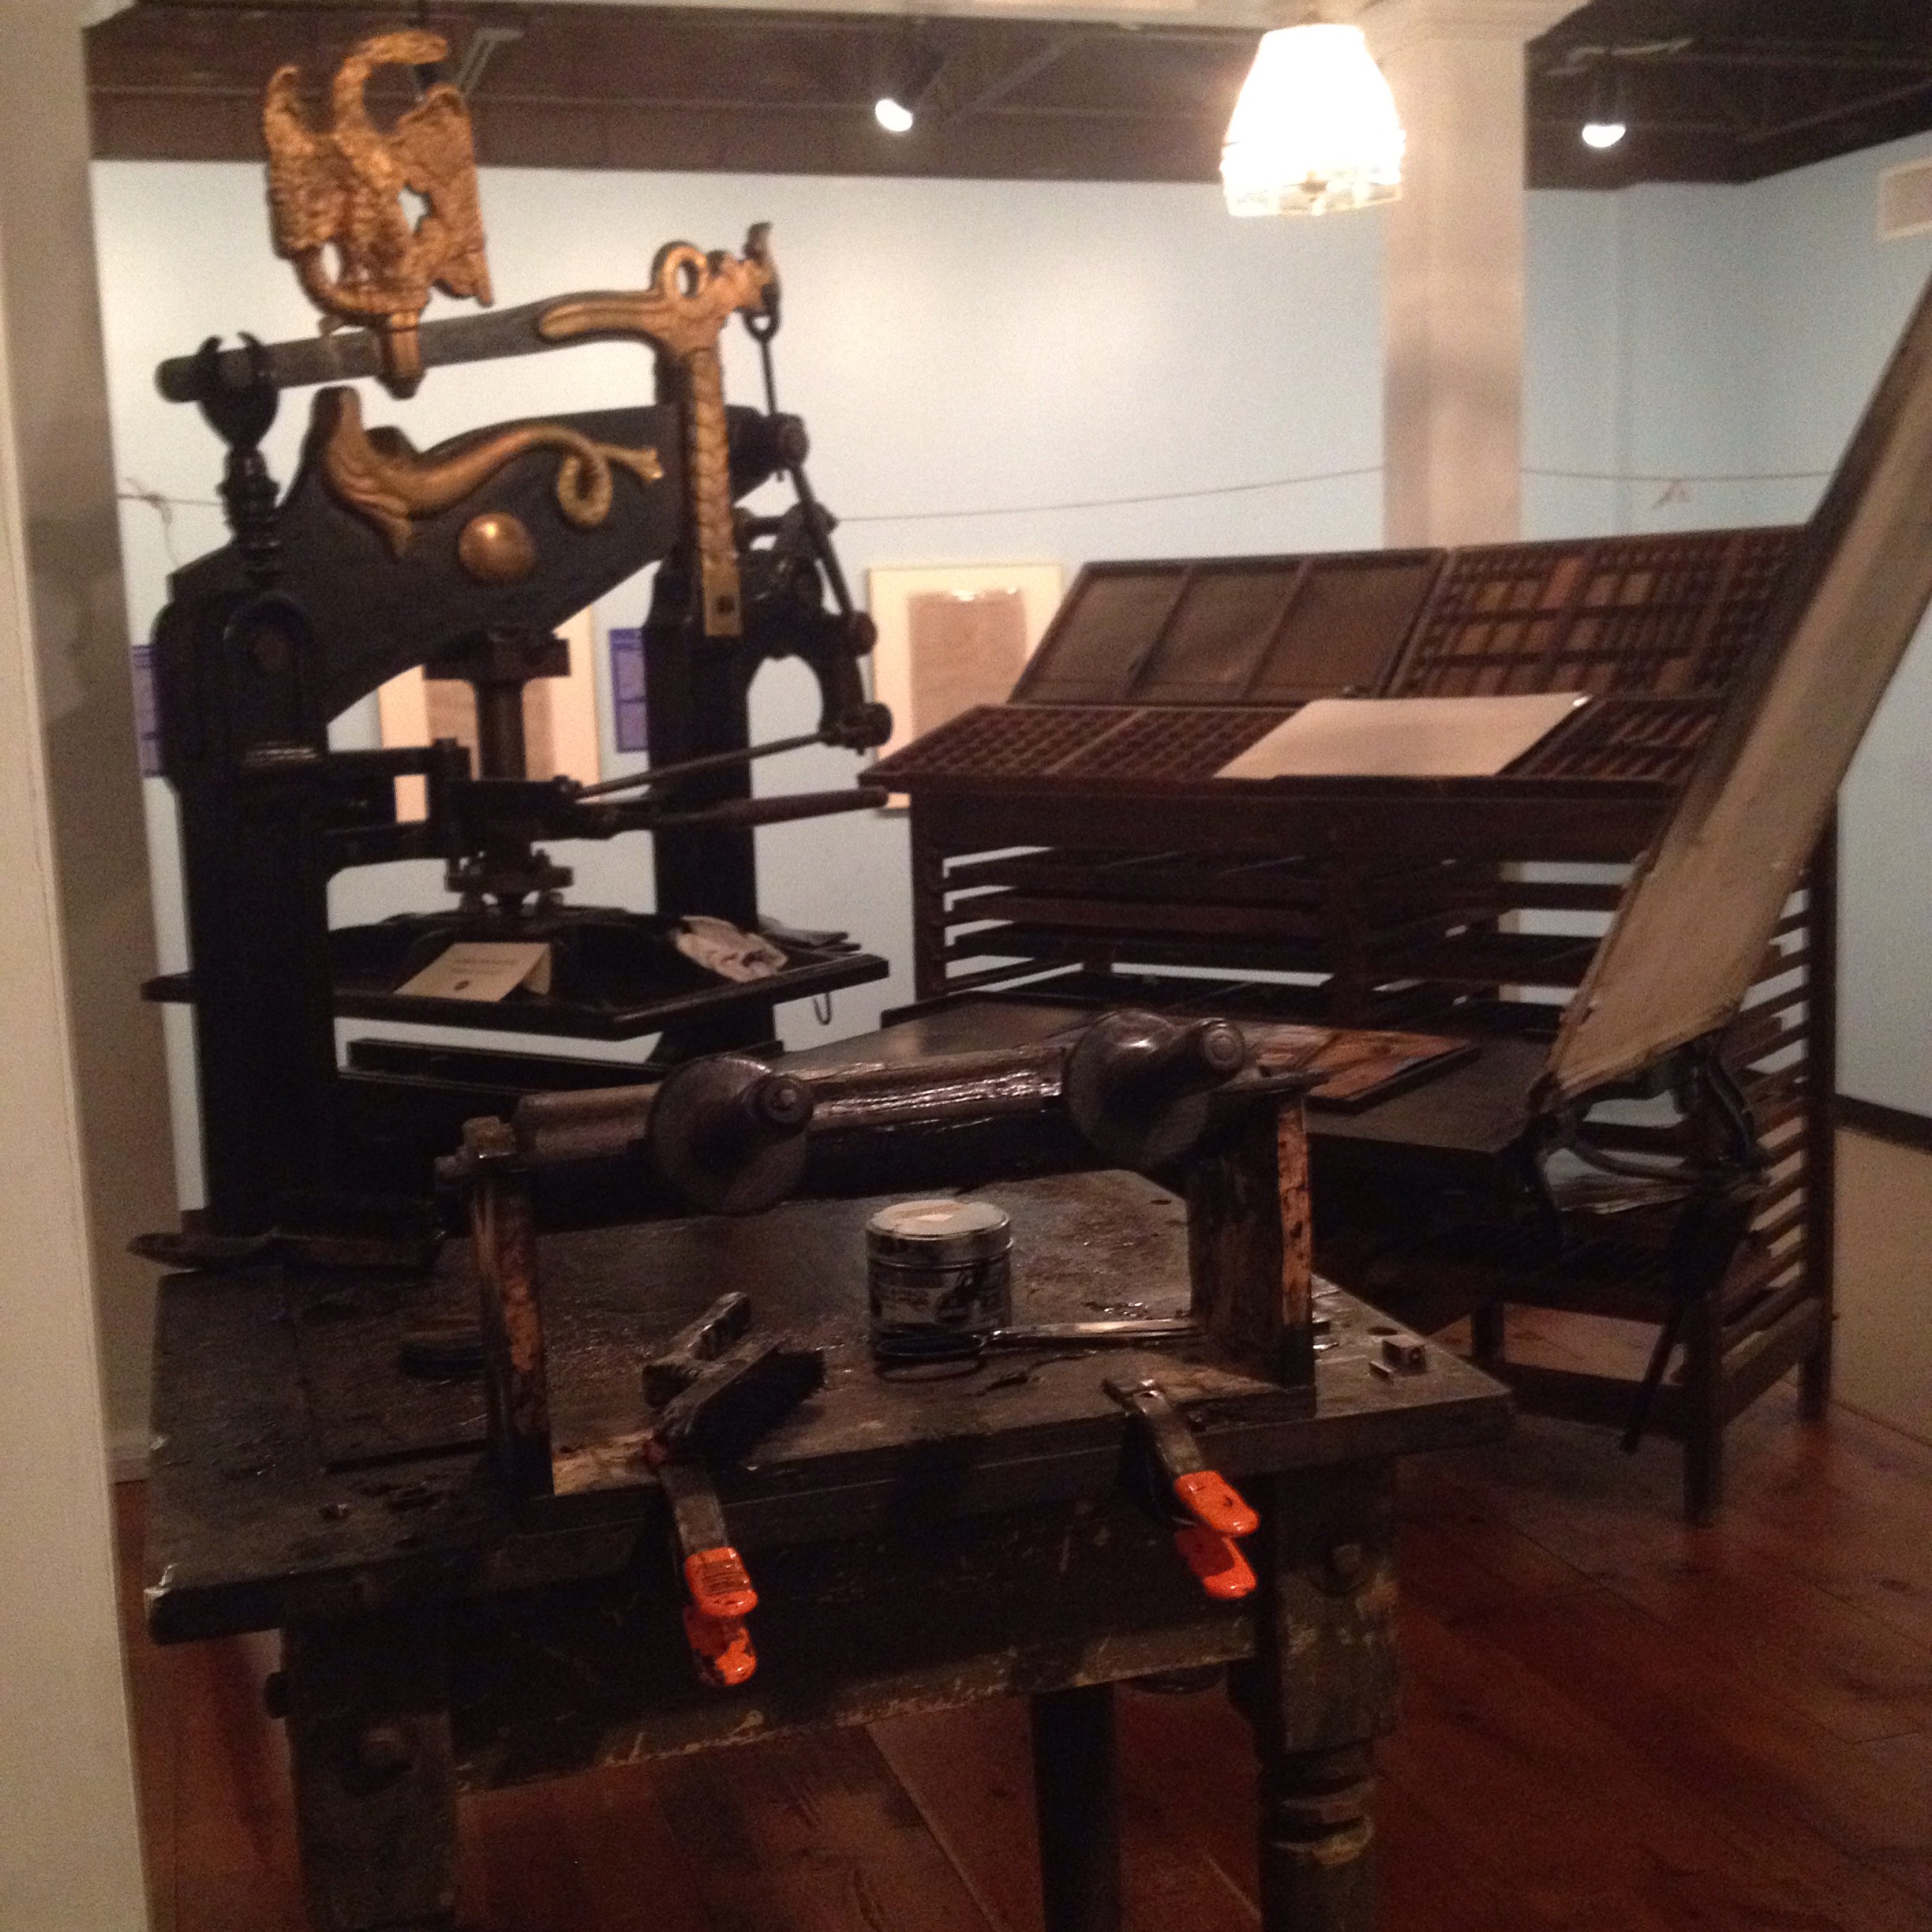 A Columbian Press at the Houston Printing History Museum